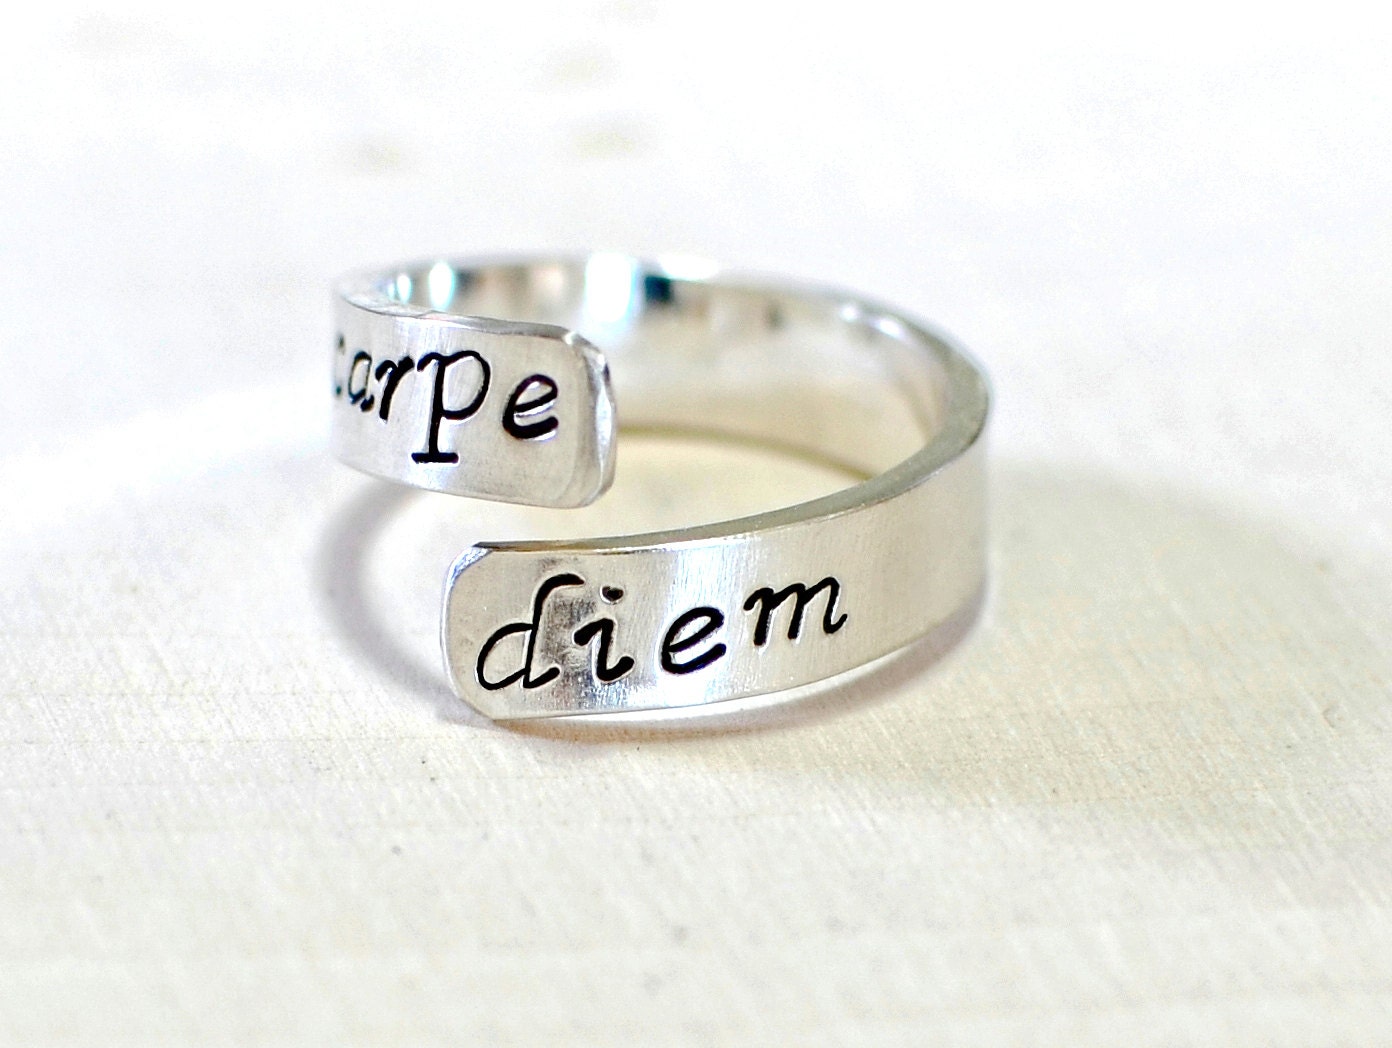 Carpe Diem Wrap Around Bypass Ring in 925 Sterling Silver